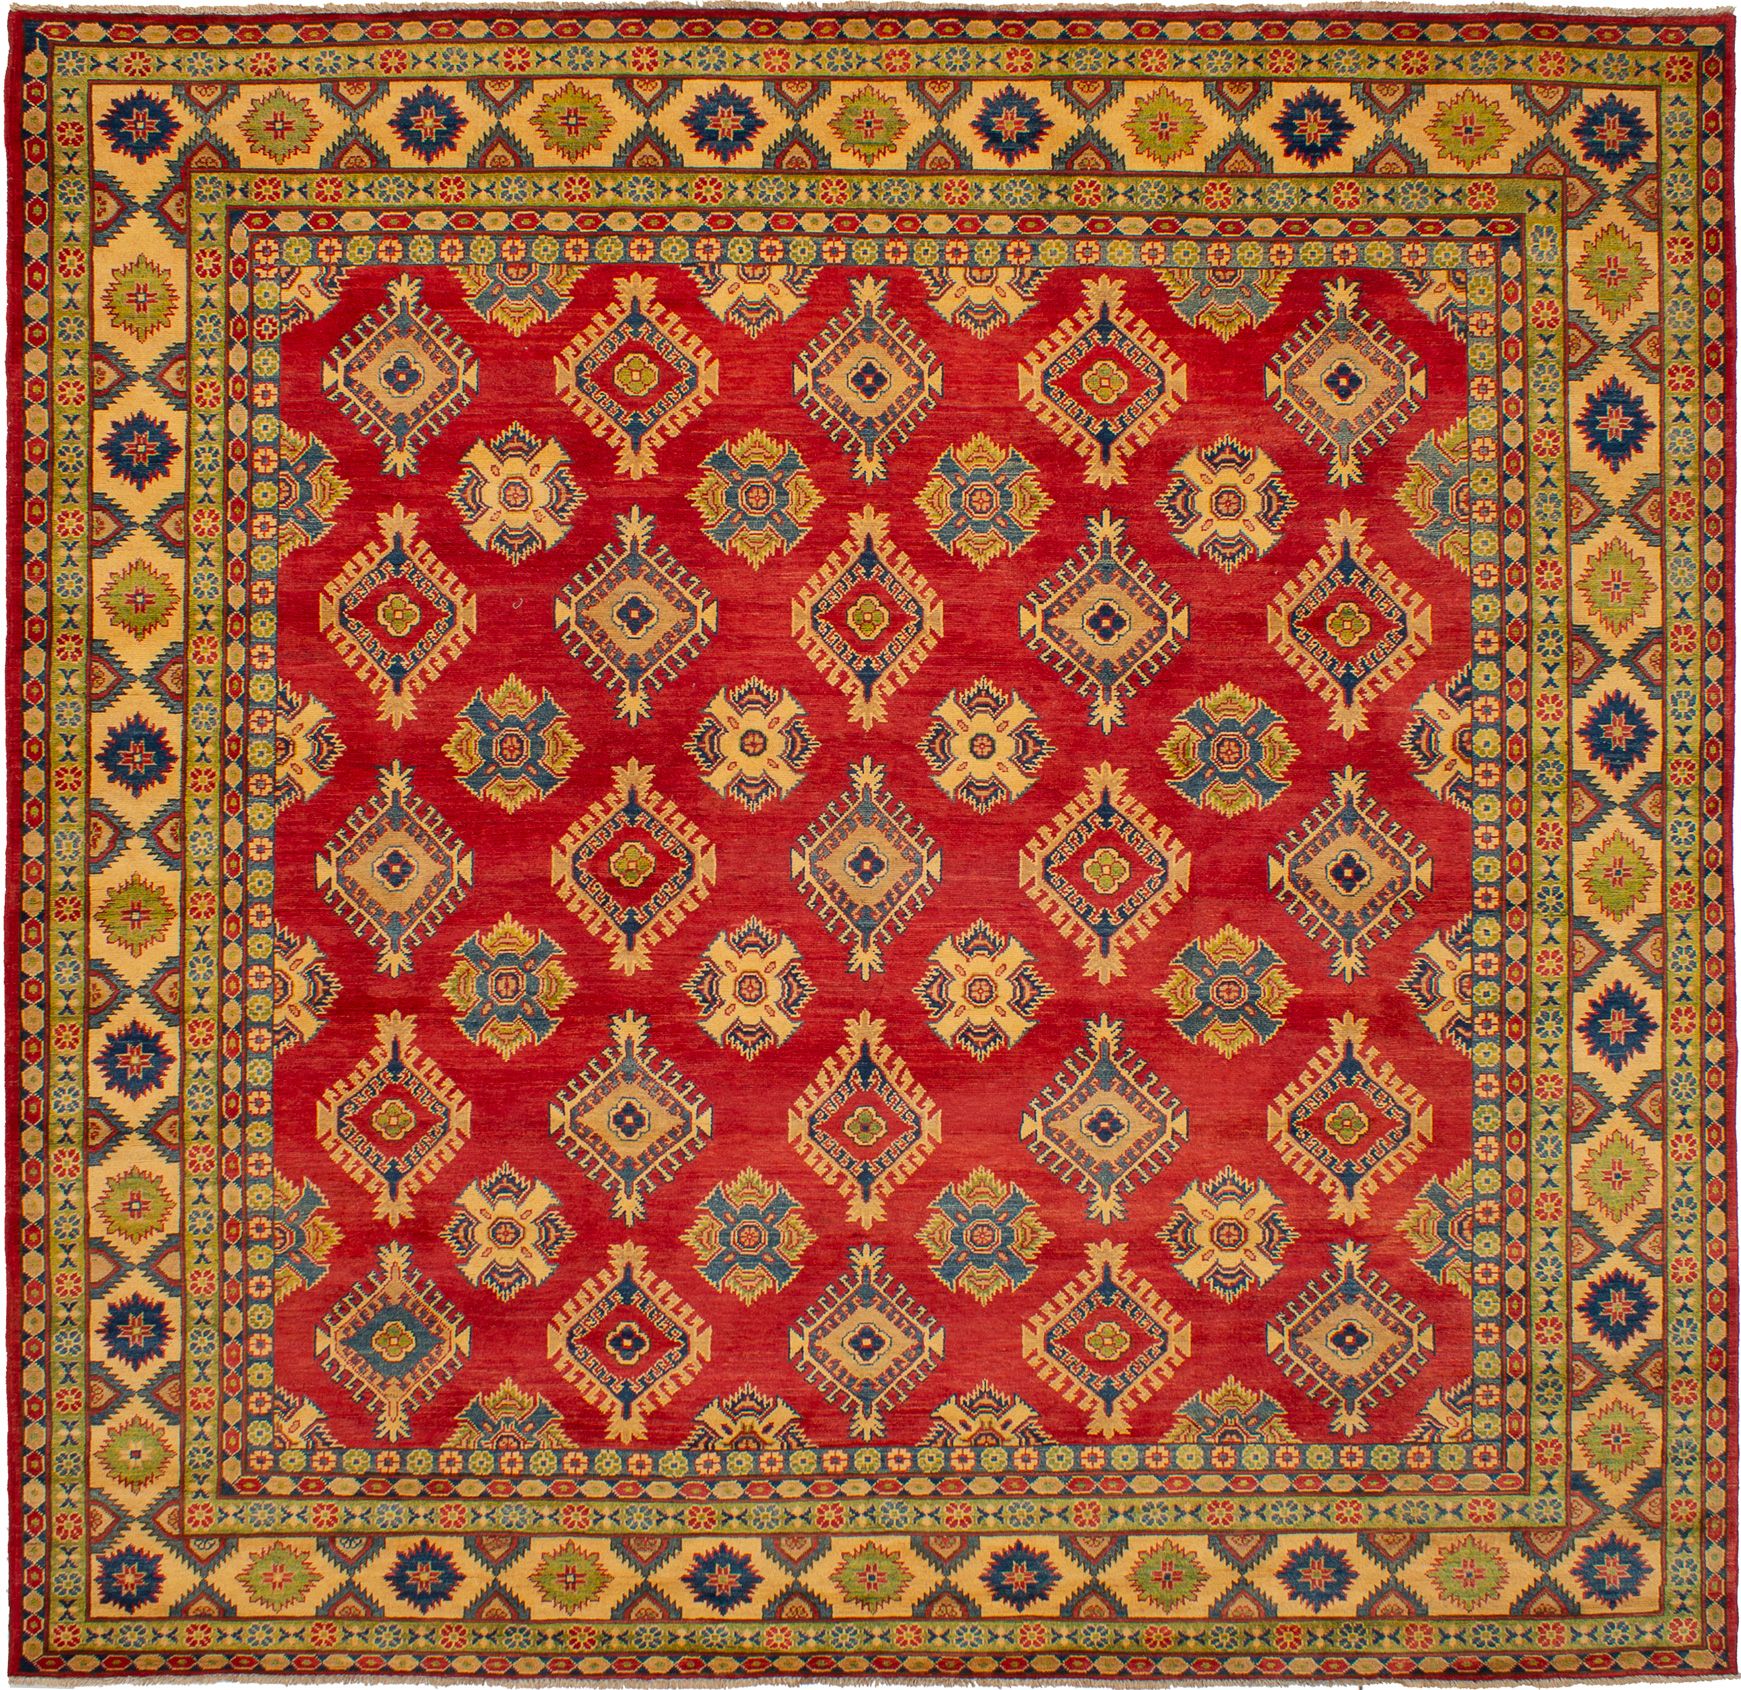 Hand-knotted Finest Gazni Red Wool Rug 10'1" x 9'8" Size: 10'1" x 9'8"  